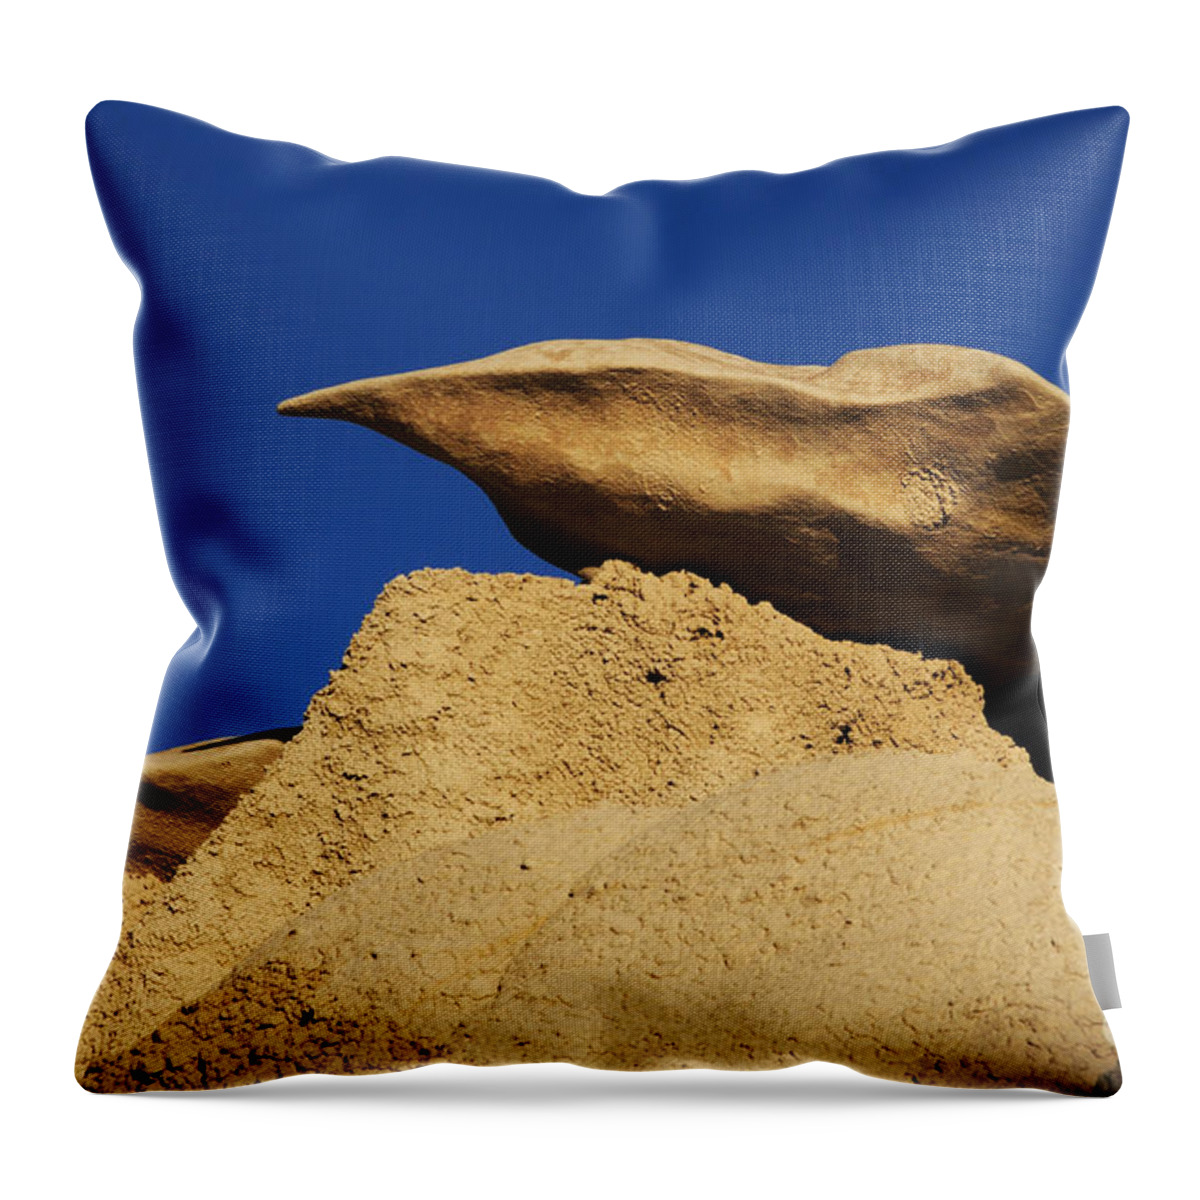 Textures Throw Pillow featuring the photograph Sculpted Rock by Vivian Christopher